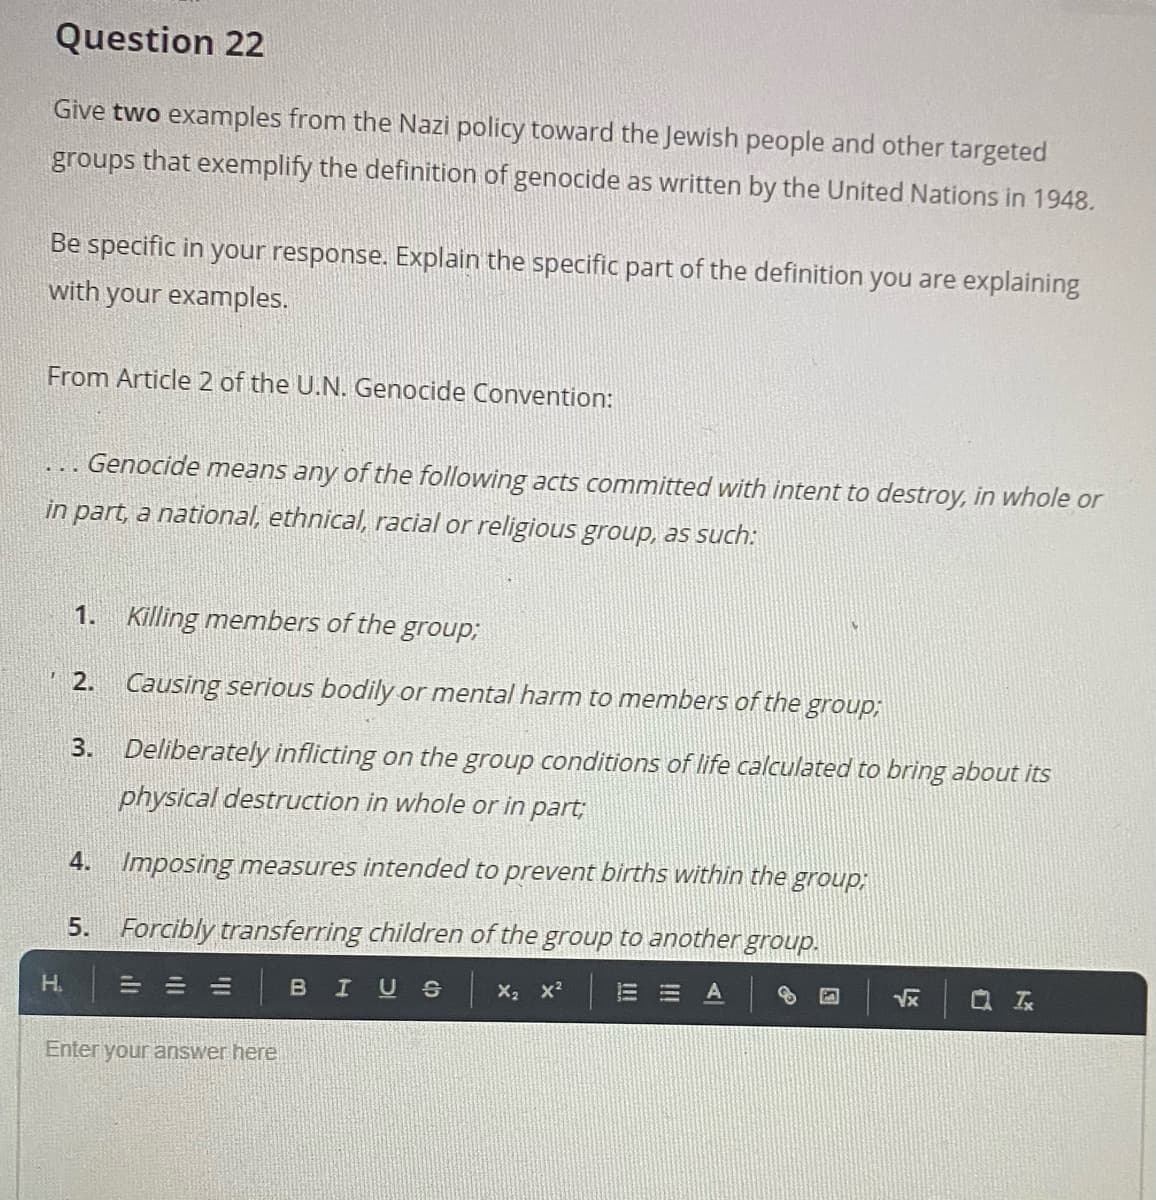 Question 22
Give two examples from the Nazi policy toward the Jewish people and other targeted
groups that exemplify the definition of genocide as written by the United Nations in 1948.
Be specific in your response. Explain the specific part of the definition you are explaining
with your examples.
From Article 2 of the U.N. Genocide Convention:
... Genocide means any of the following acts committed with intent to destroy, in whole or
in part, a national, ethnical, racial or religious group, as such:
1.
Killing members of the group;
2. Causing serious bodily or mental harm to members of the group;
3. Deliberately inflicting on the group conditions of life calculated to bring about its
physical destruction in whole or in part;
4. Imposing measures intended to prevent births within the group,;
5. Forcibly transferring children of the group to another group.
H.
= =山
IUS X2 x2
Vx
Q 云
Enter your answer here
